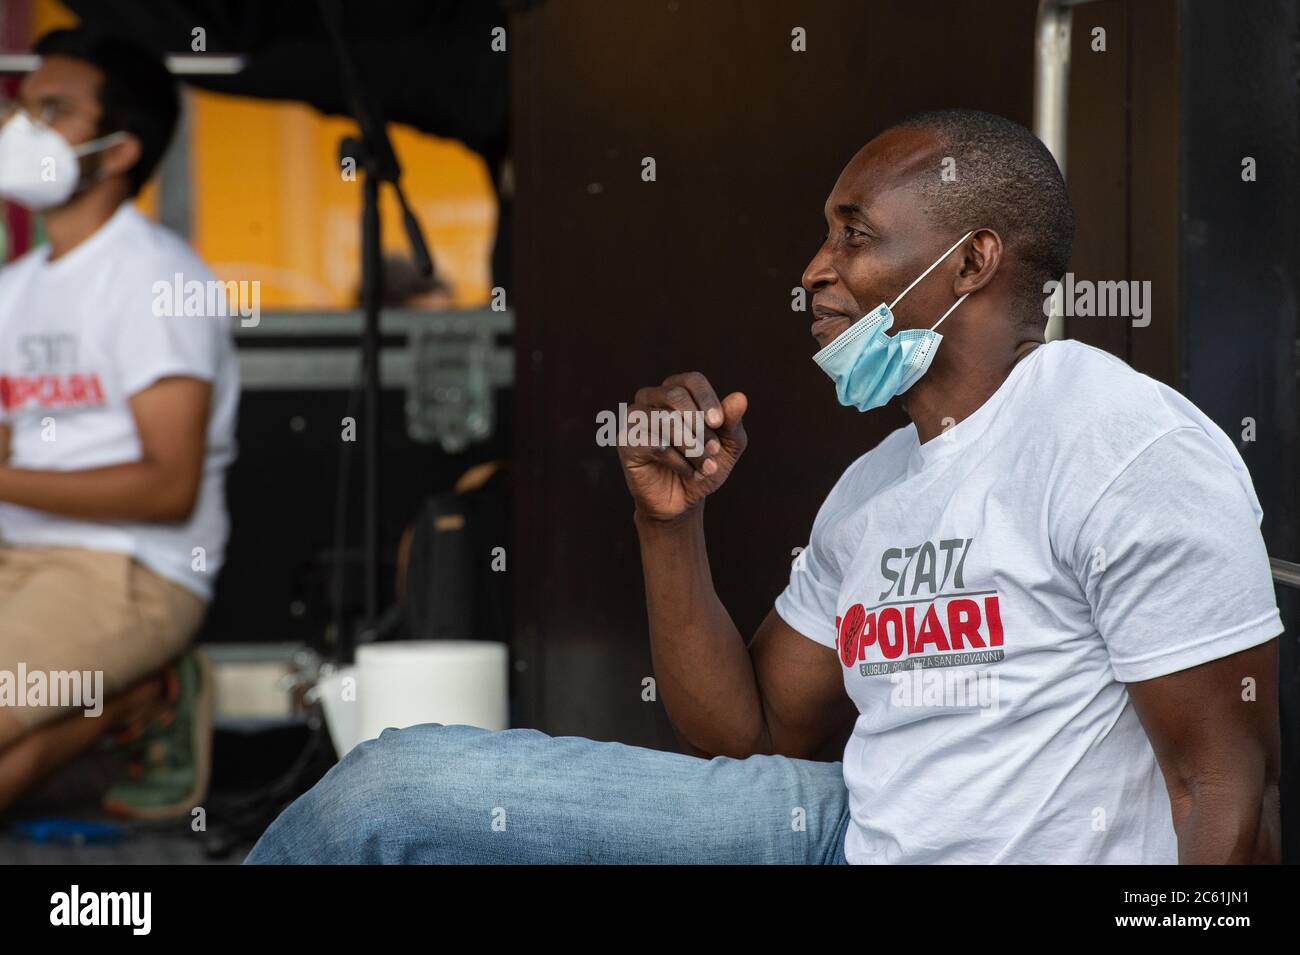 Aboubakar Soumahoro, Italian-Ivorian trade unionist of the Agricultural Coordination of the Union of Base Union (USB). 'Stati Popolari', event organized in Piazza San Giovanni, in Rome, Italy, 5-07-2020. Stock Photo